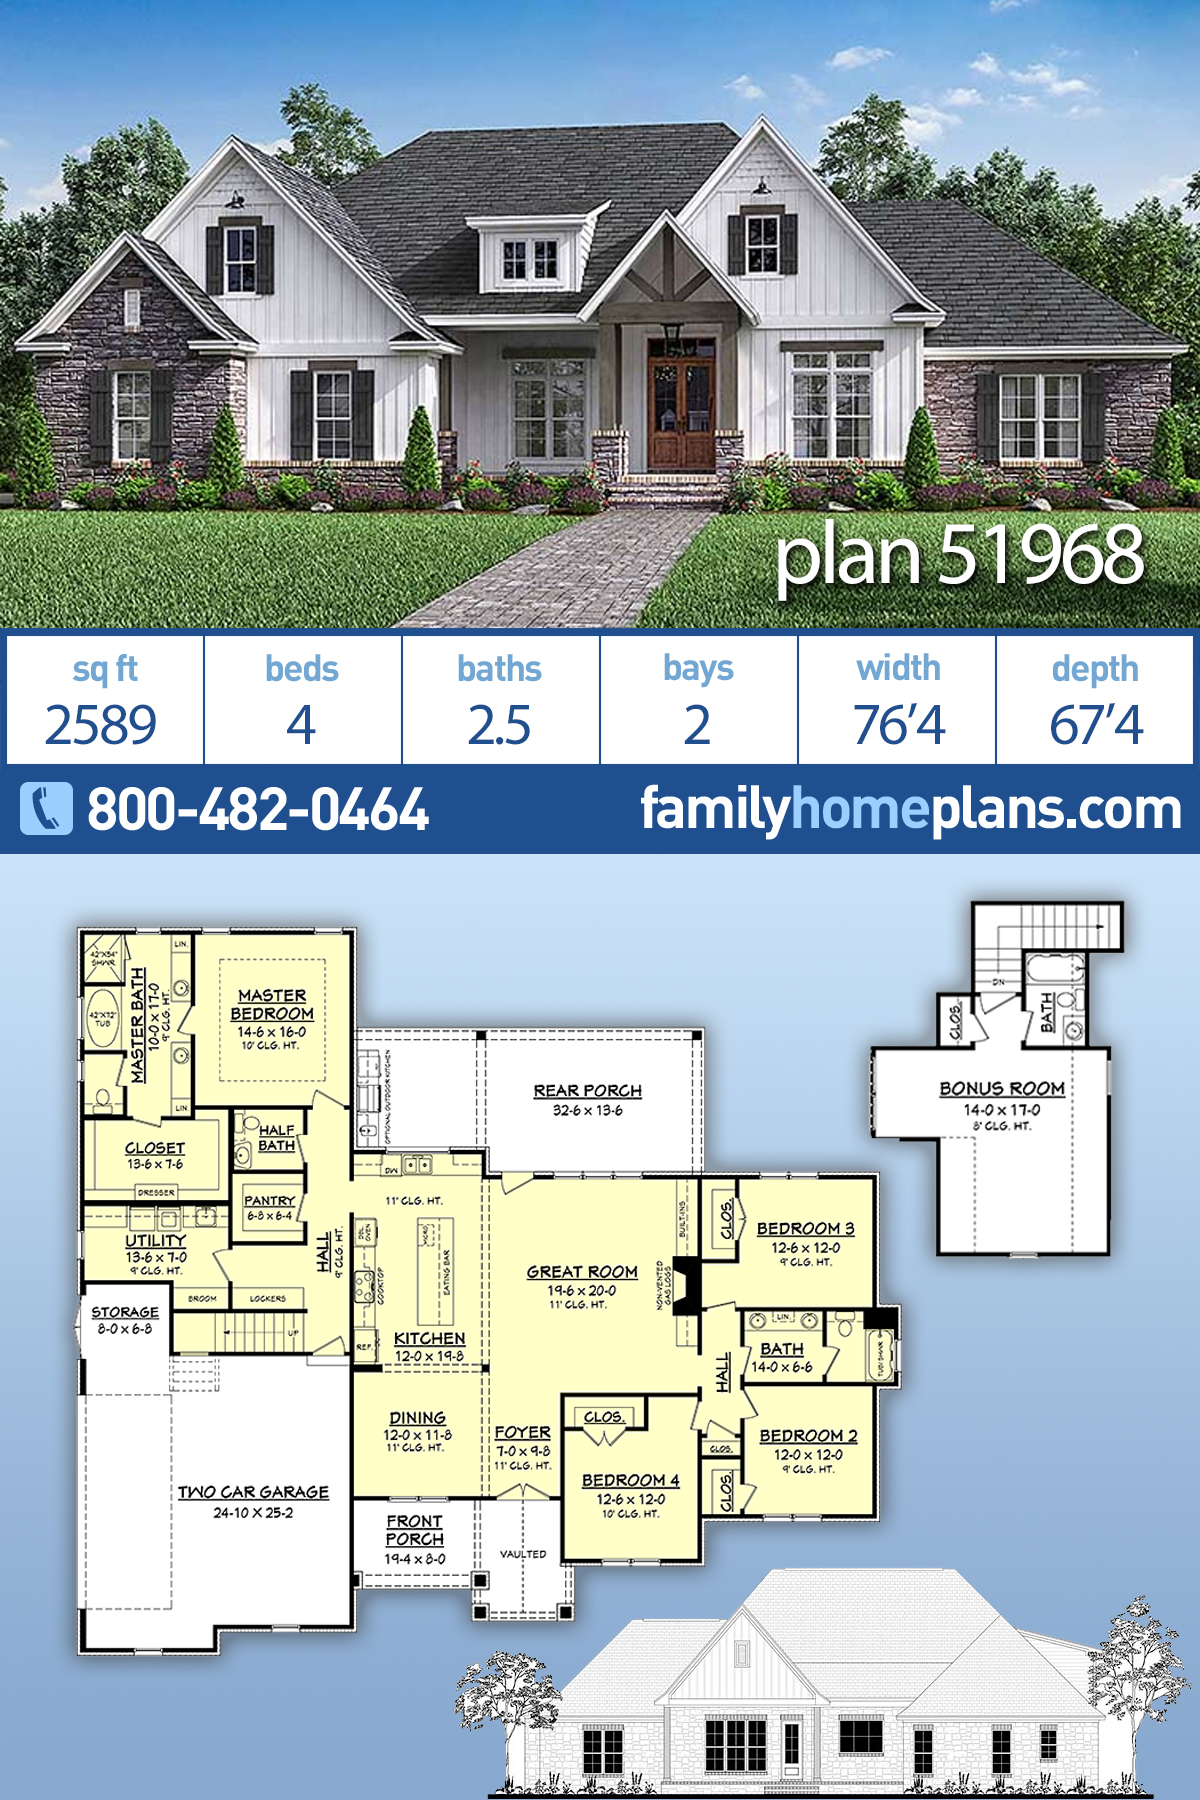 House Plan 51968 - Traditional Style with 2589 Sq Ft, 4 Bed, 2 Bath, 1 ...